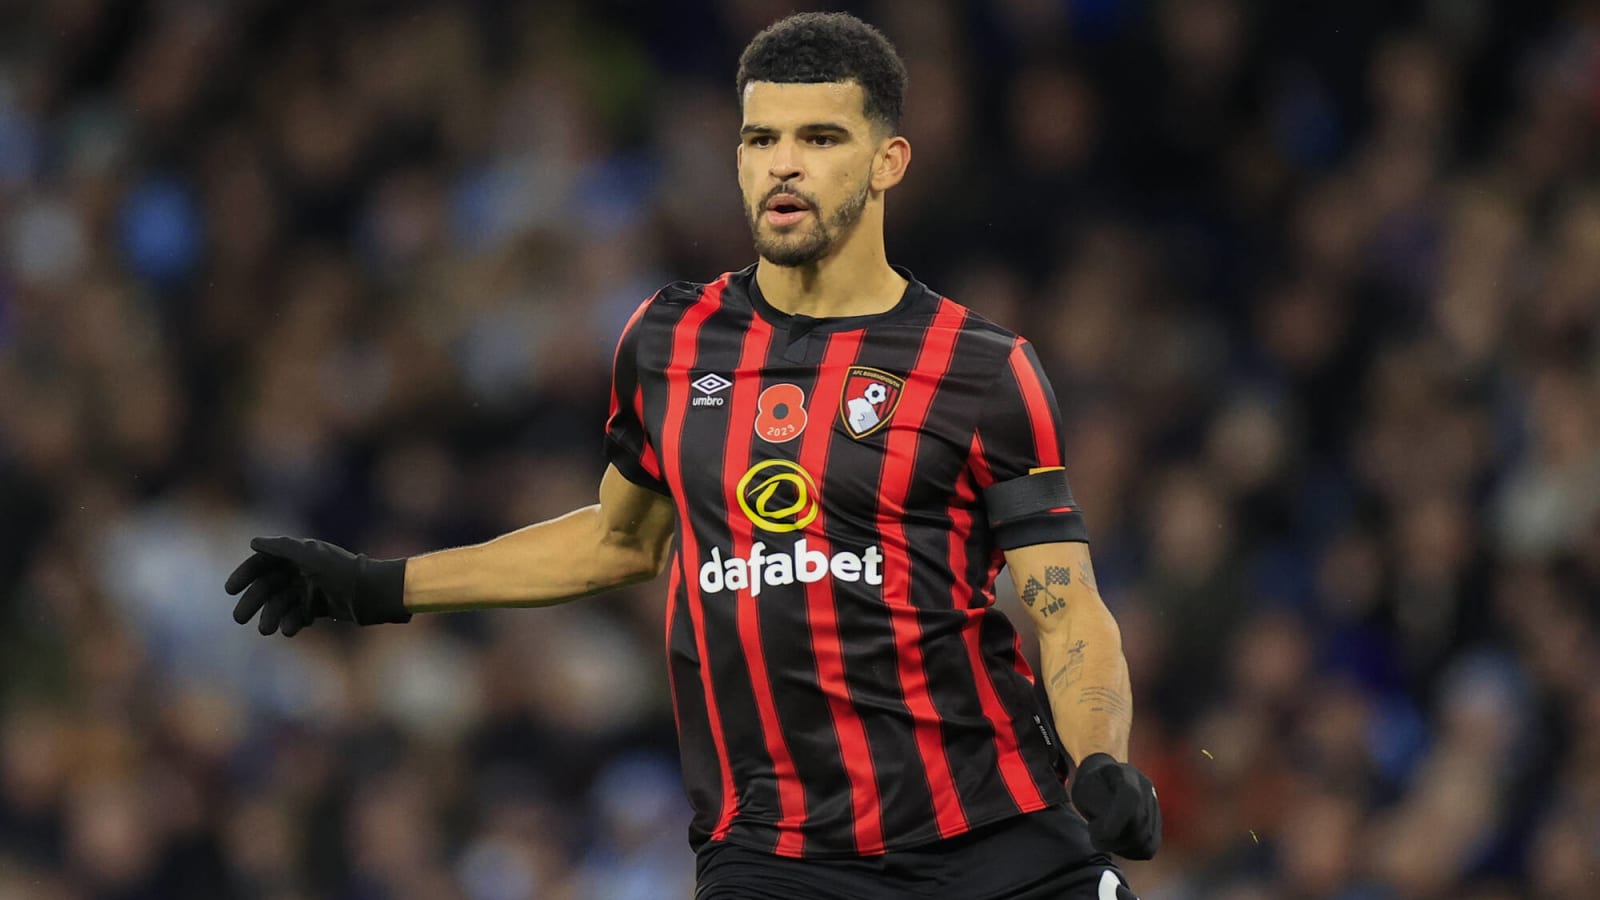 Watch: Solanke doubles Newcastle’s misery with a cheeky improvised finish